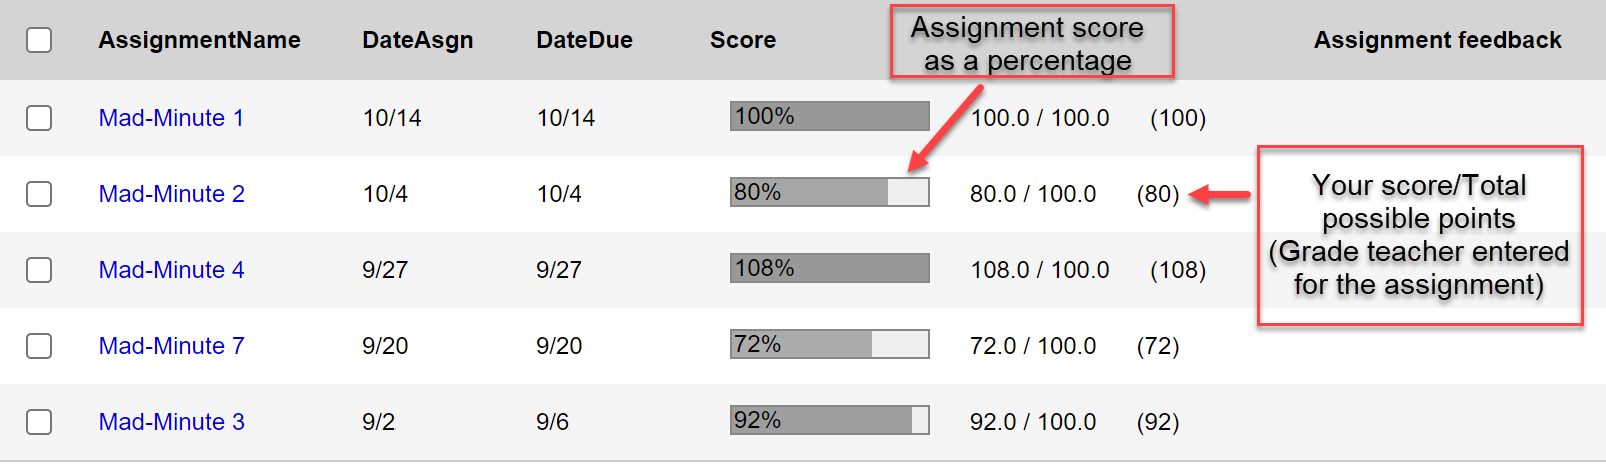 Score details, showing the score as a percentage and student score/total possible points.